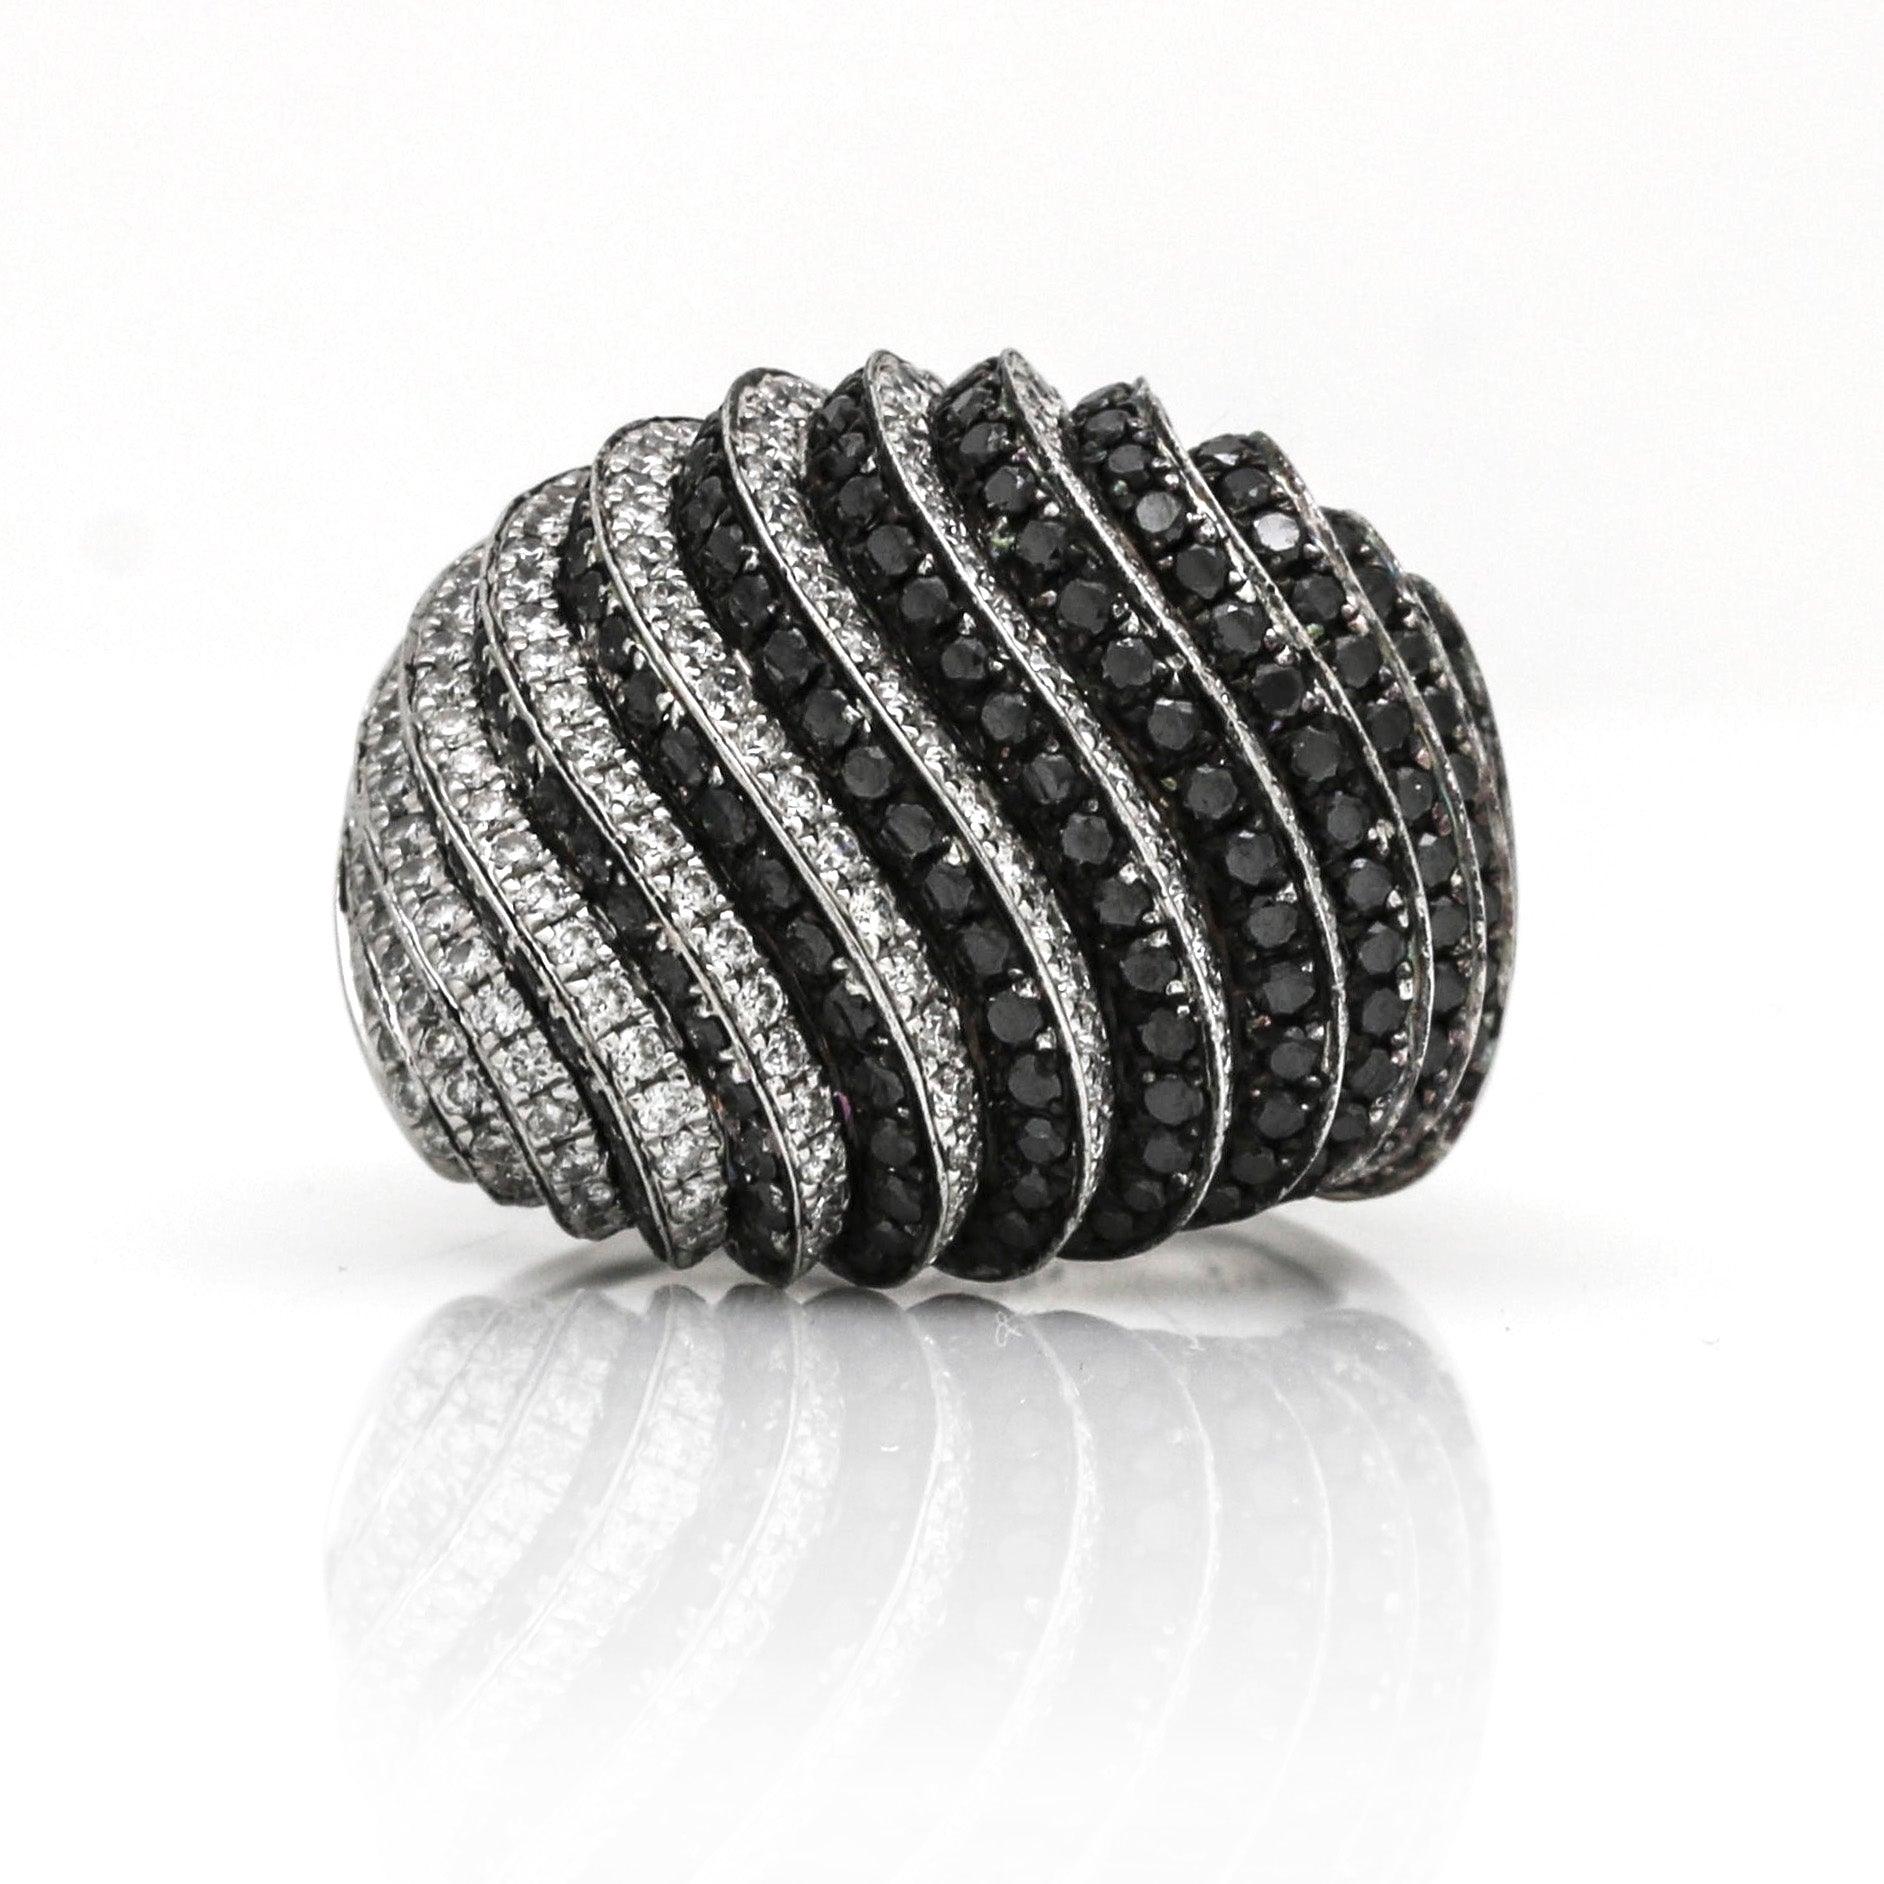 Signed Black and White Diamond Waves Dome Statement Ring in 18k White Gold - 31 Jewels Inc.